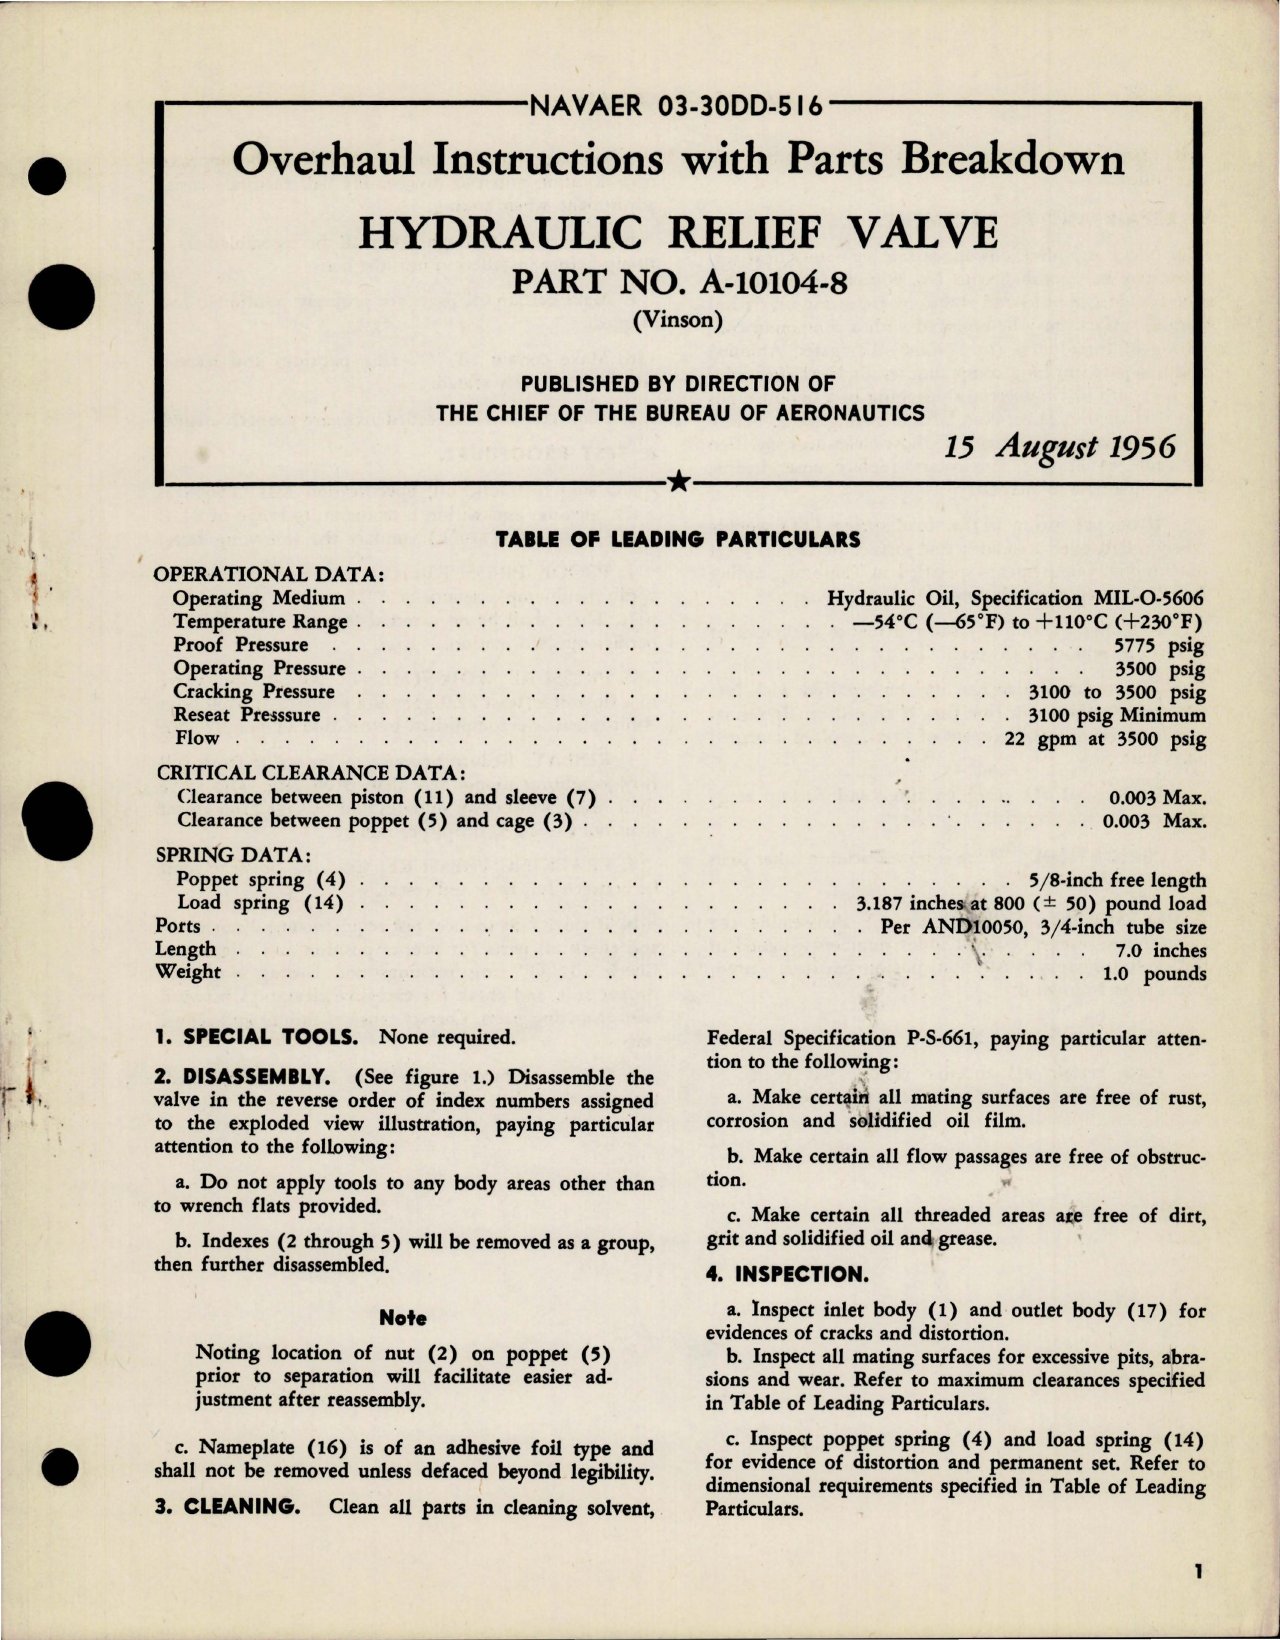 Sample page 1 from AirCorps Library document: Overhaul Instructions with Parts Breakdown for Hydraulic Relief Valve - Part A-10104-8 